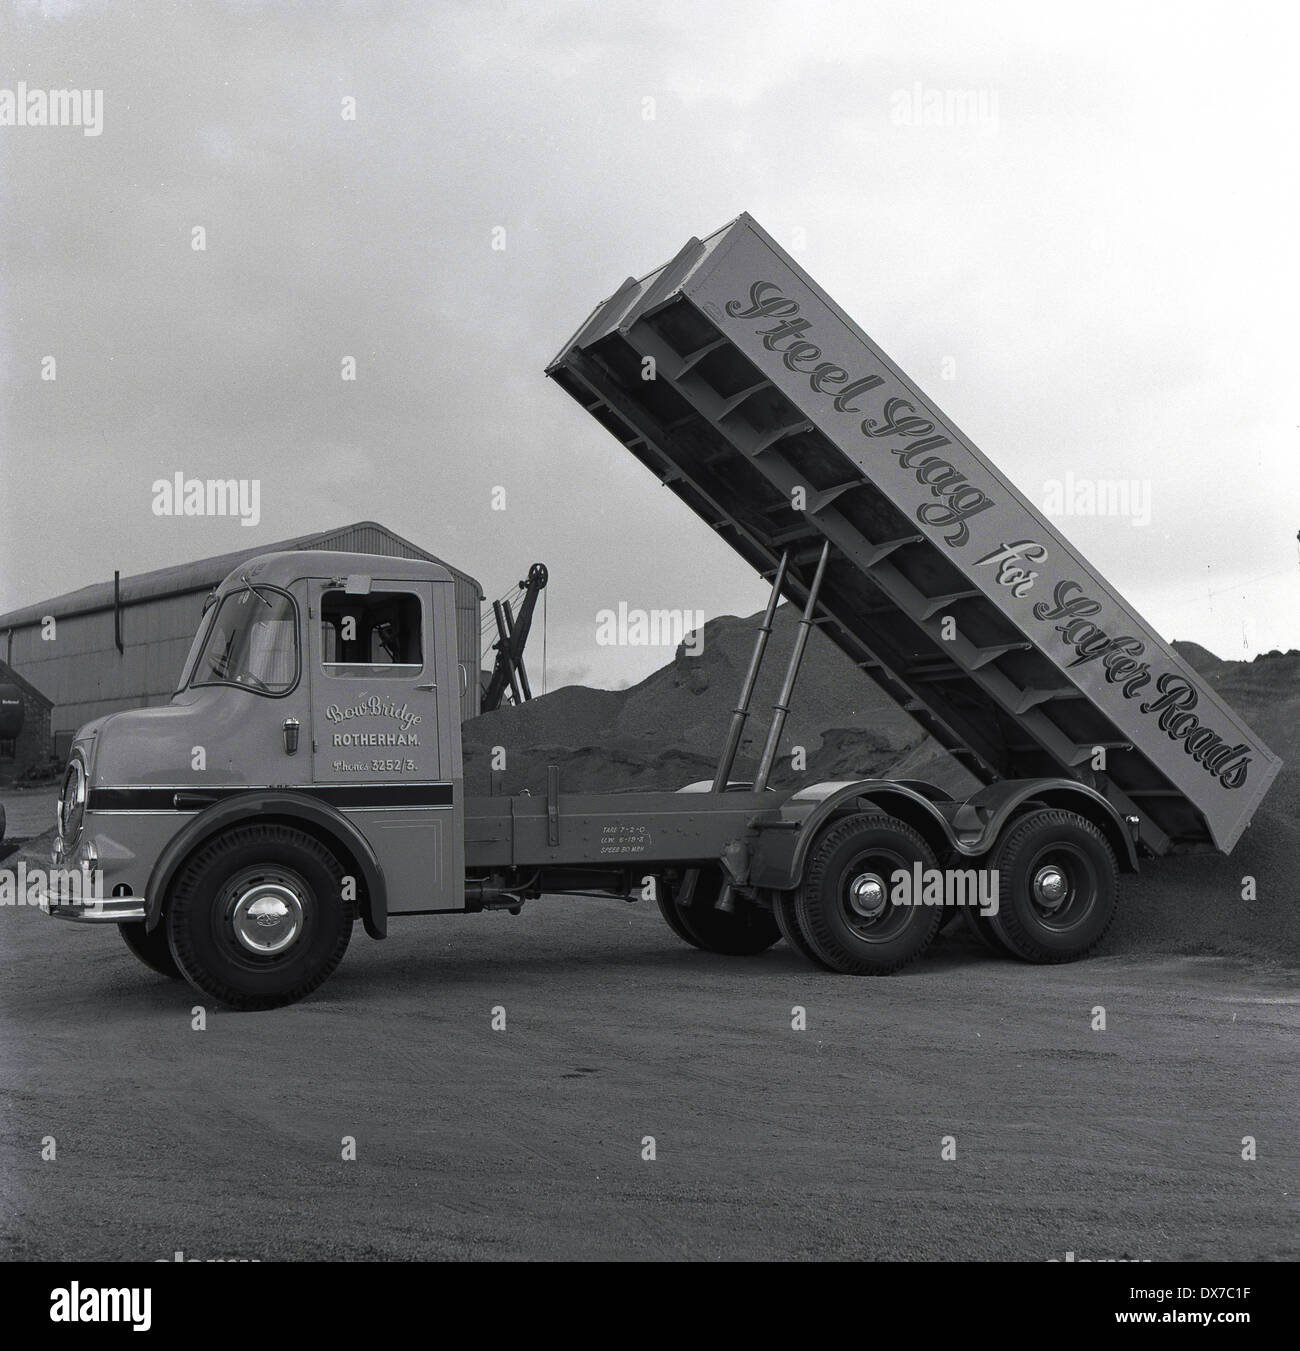 ERF (camion) azienda Historical-picture-1950s-of-a-steel-slag-truck-tipping-out-its-load-DX7C1F